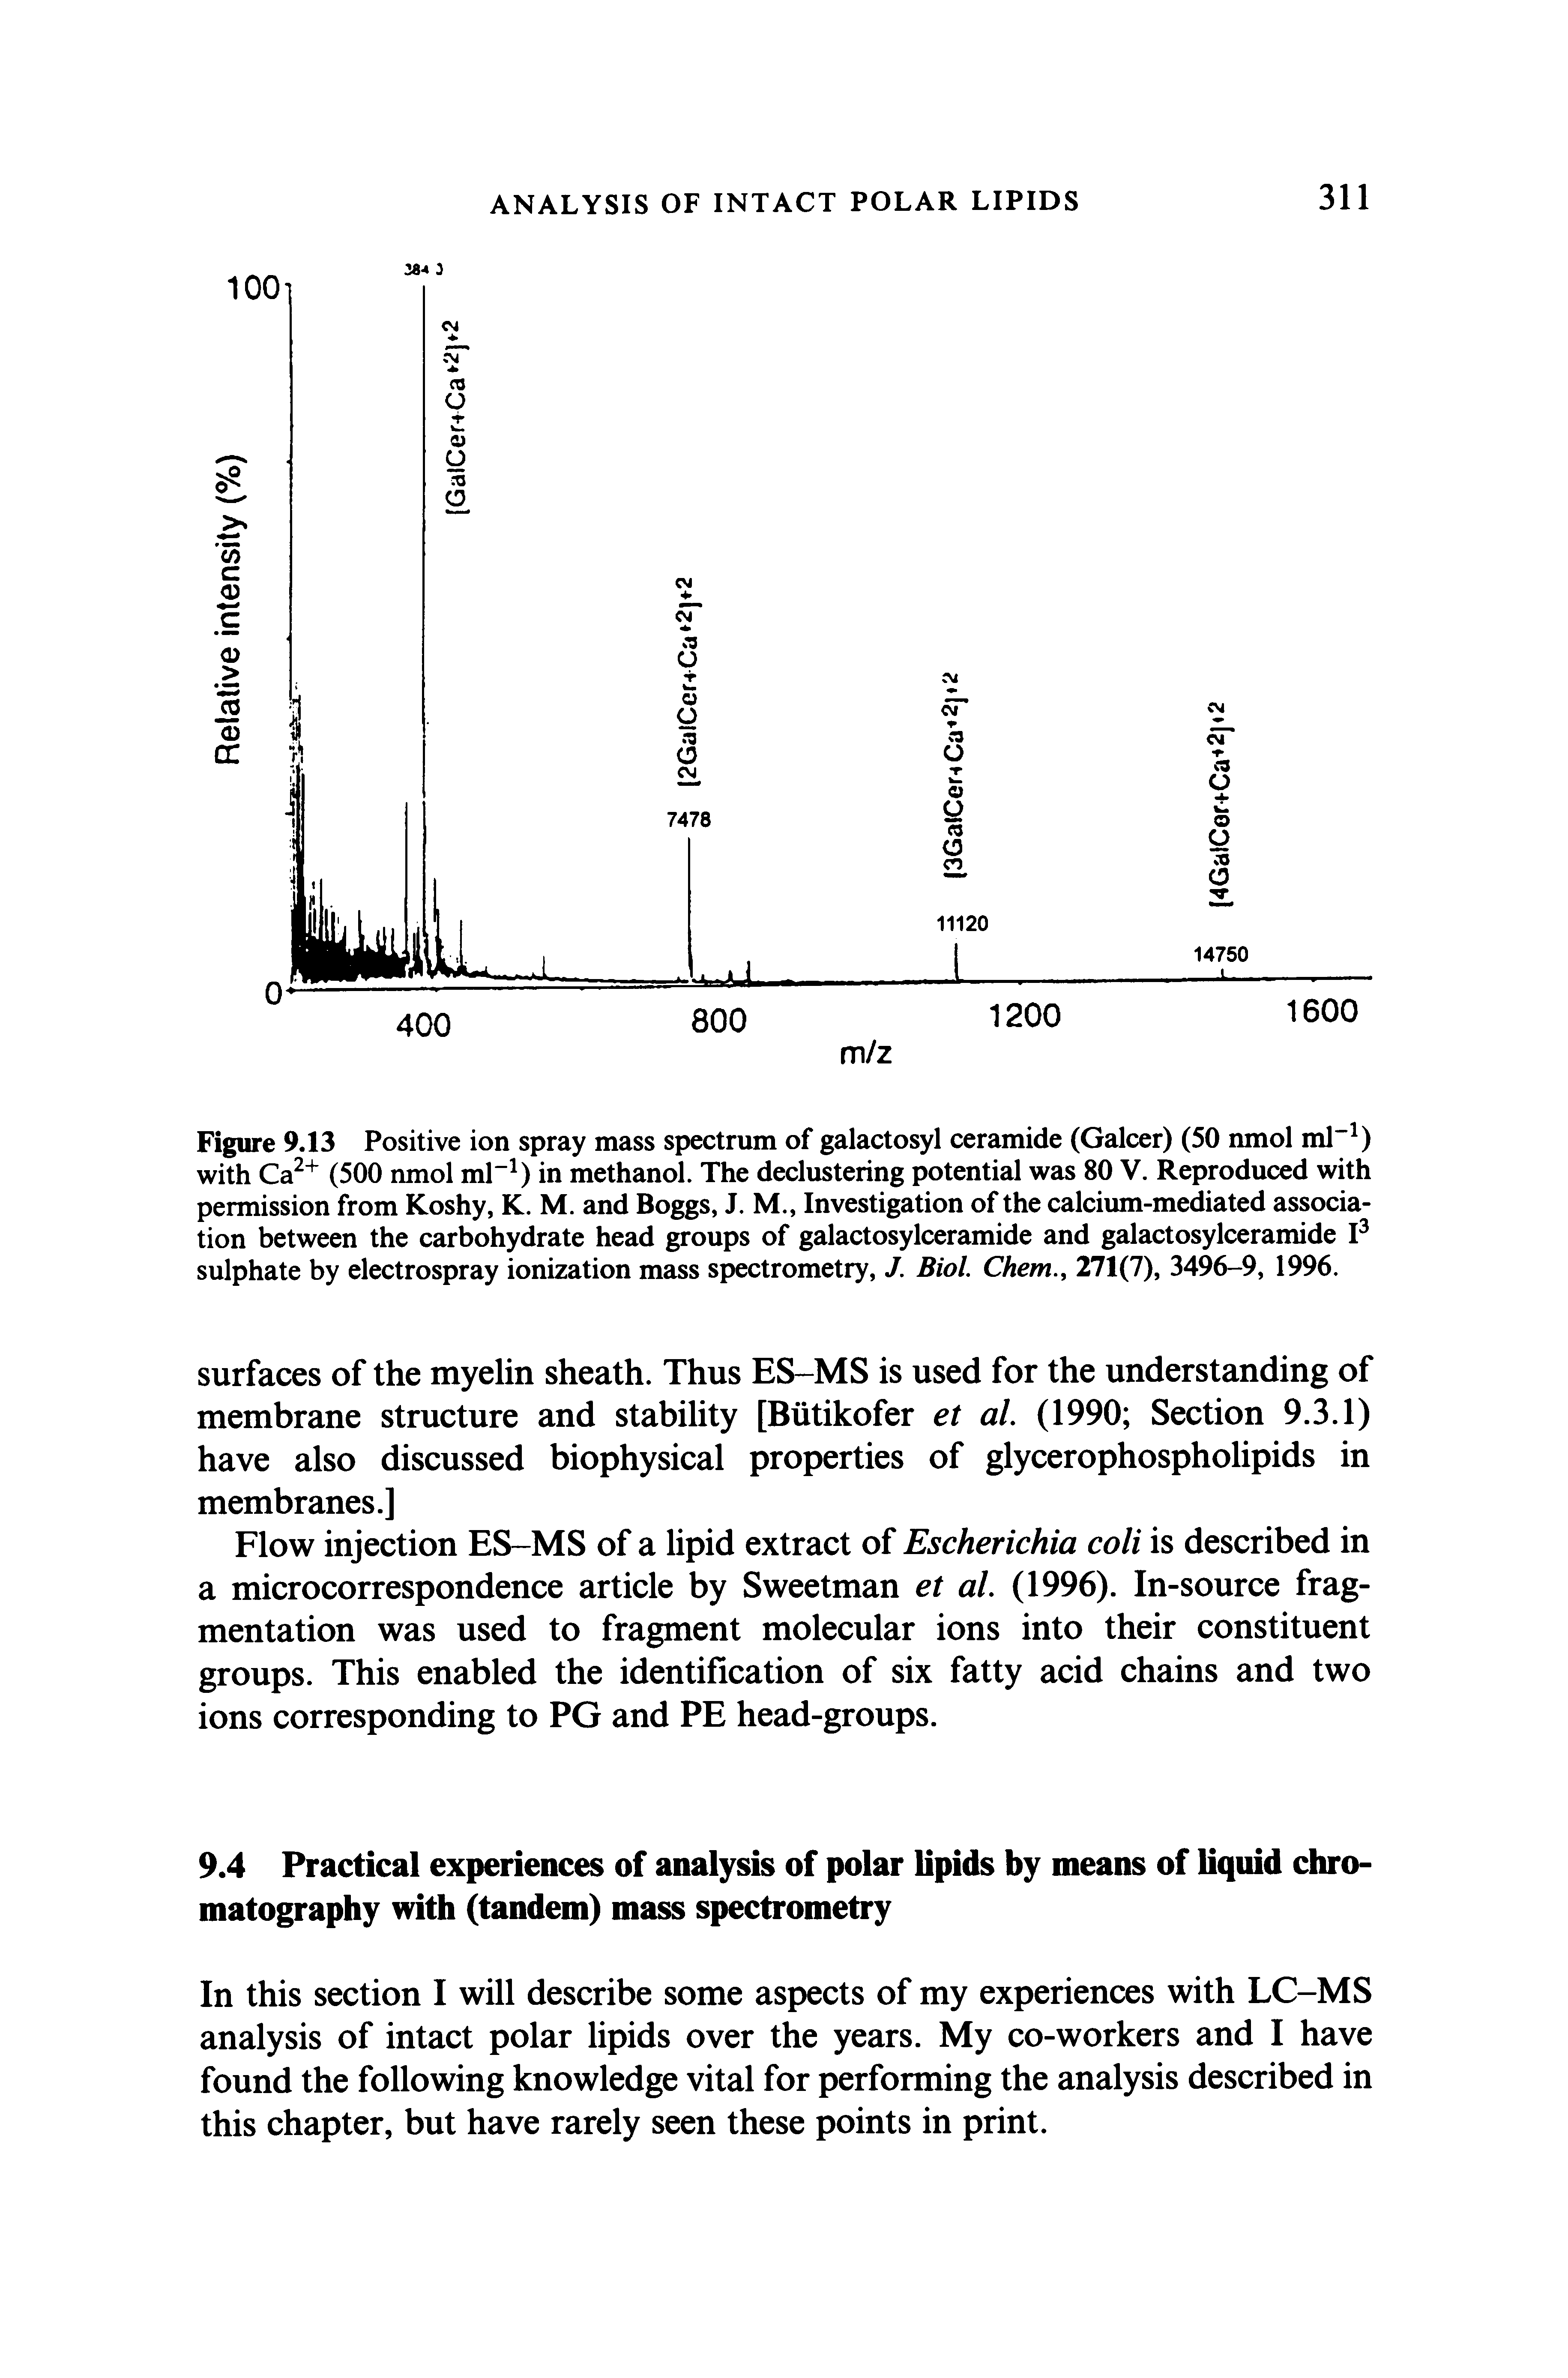 Figure 9.13 Positive ion spray mass spectrum of galactosyl ceramide (Galcer) (50 nmol ml" ) with (500 nmol ml" ) in methanol. The declustering potential was 80 V. Reproduced with permission from Koshy, K. M. and Boggs, J. M., Investigation of the calcium-mediated association between the carbohydrate head groups of galactosylceramide and galactosylceramide I sulphate by electrospray ionization mass spectrometry, J. Biol Chem., 271(7), 3496-9, 1996.